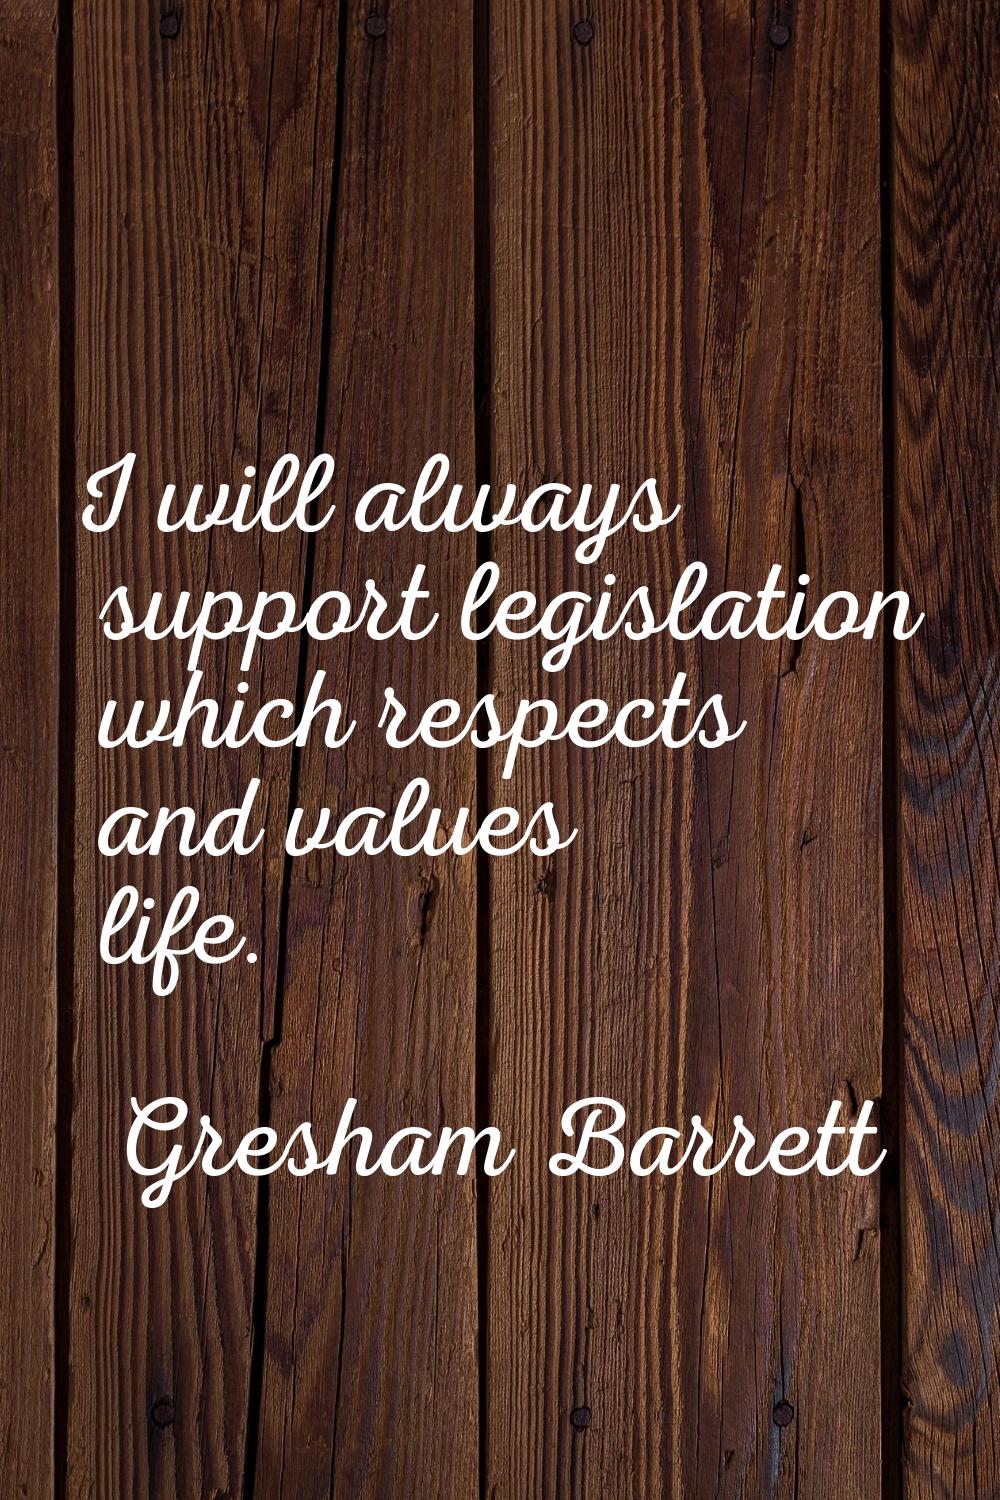 I will always support legislation which respects and values life.